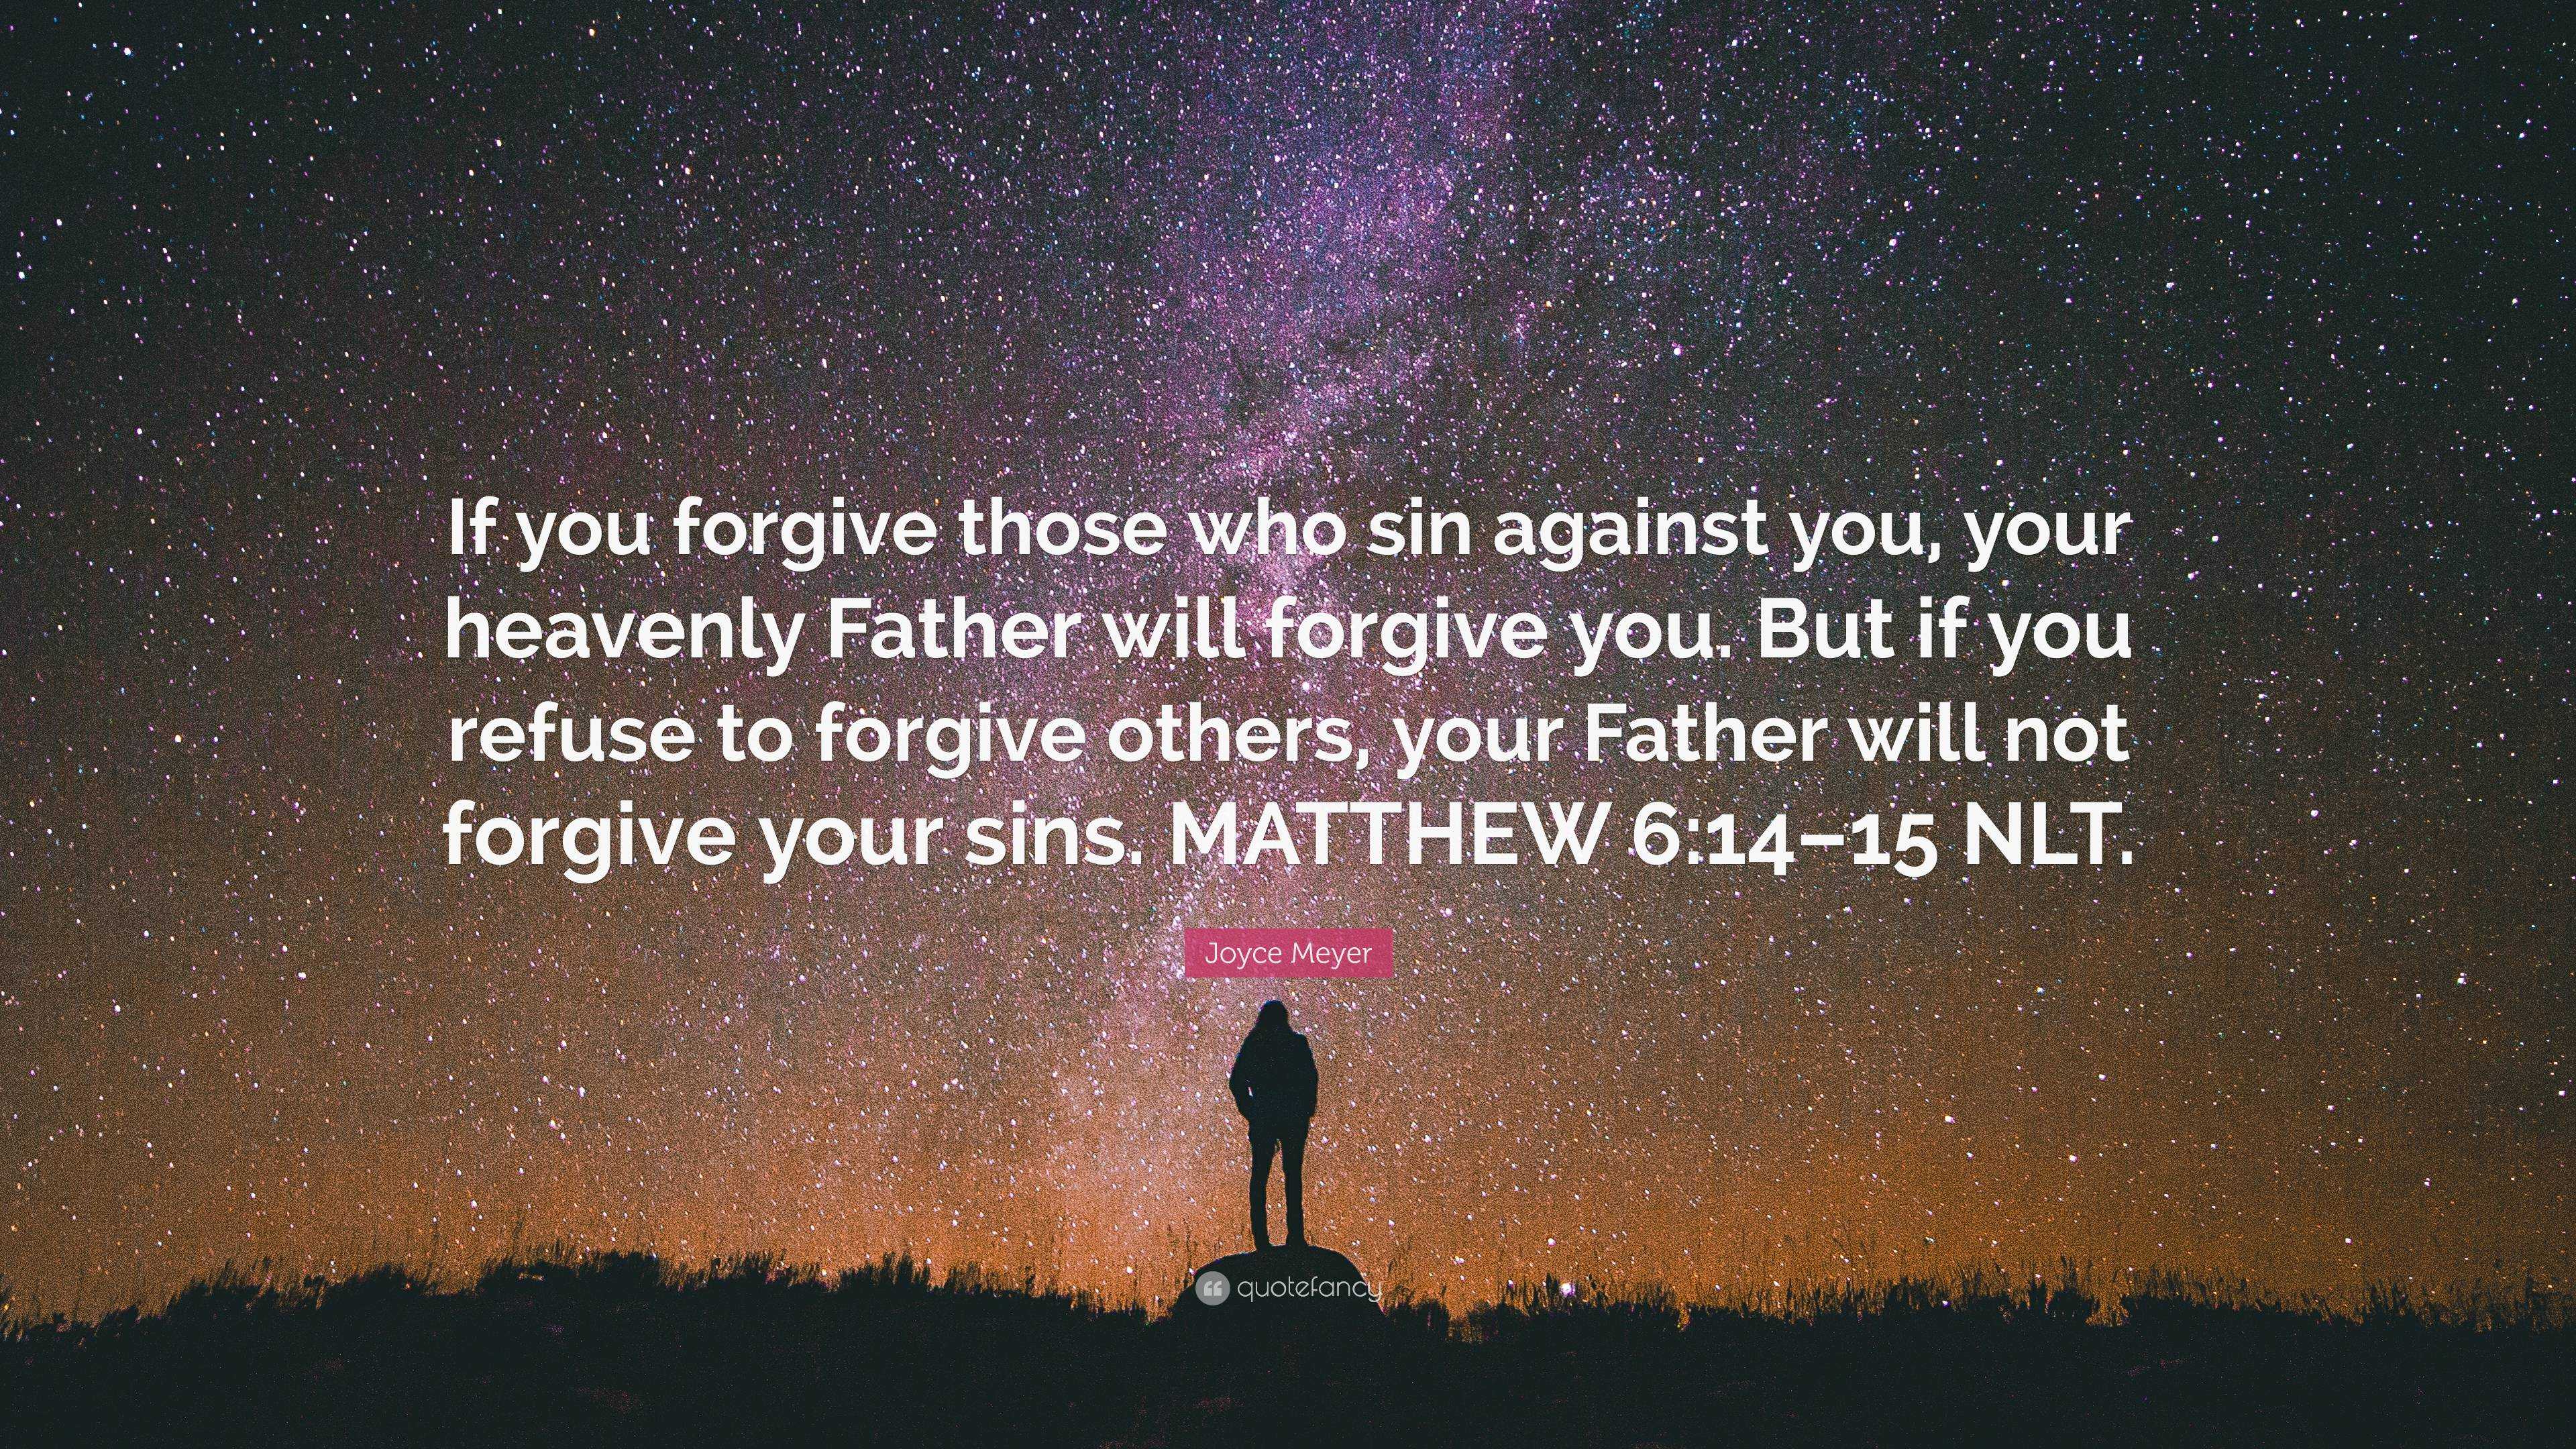 Joyce Meyer Quote: “If you forgive those who sin against you, your heavenly  Father will forgive you. But if you refuse to forgive others, yo”